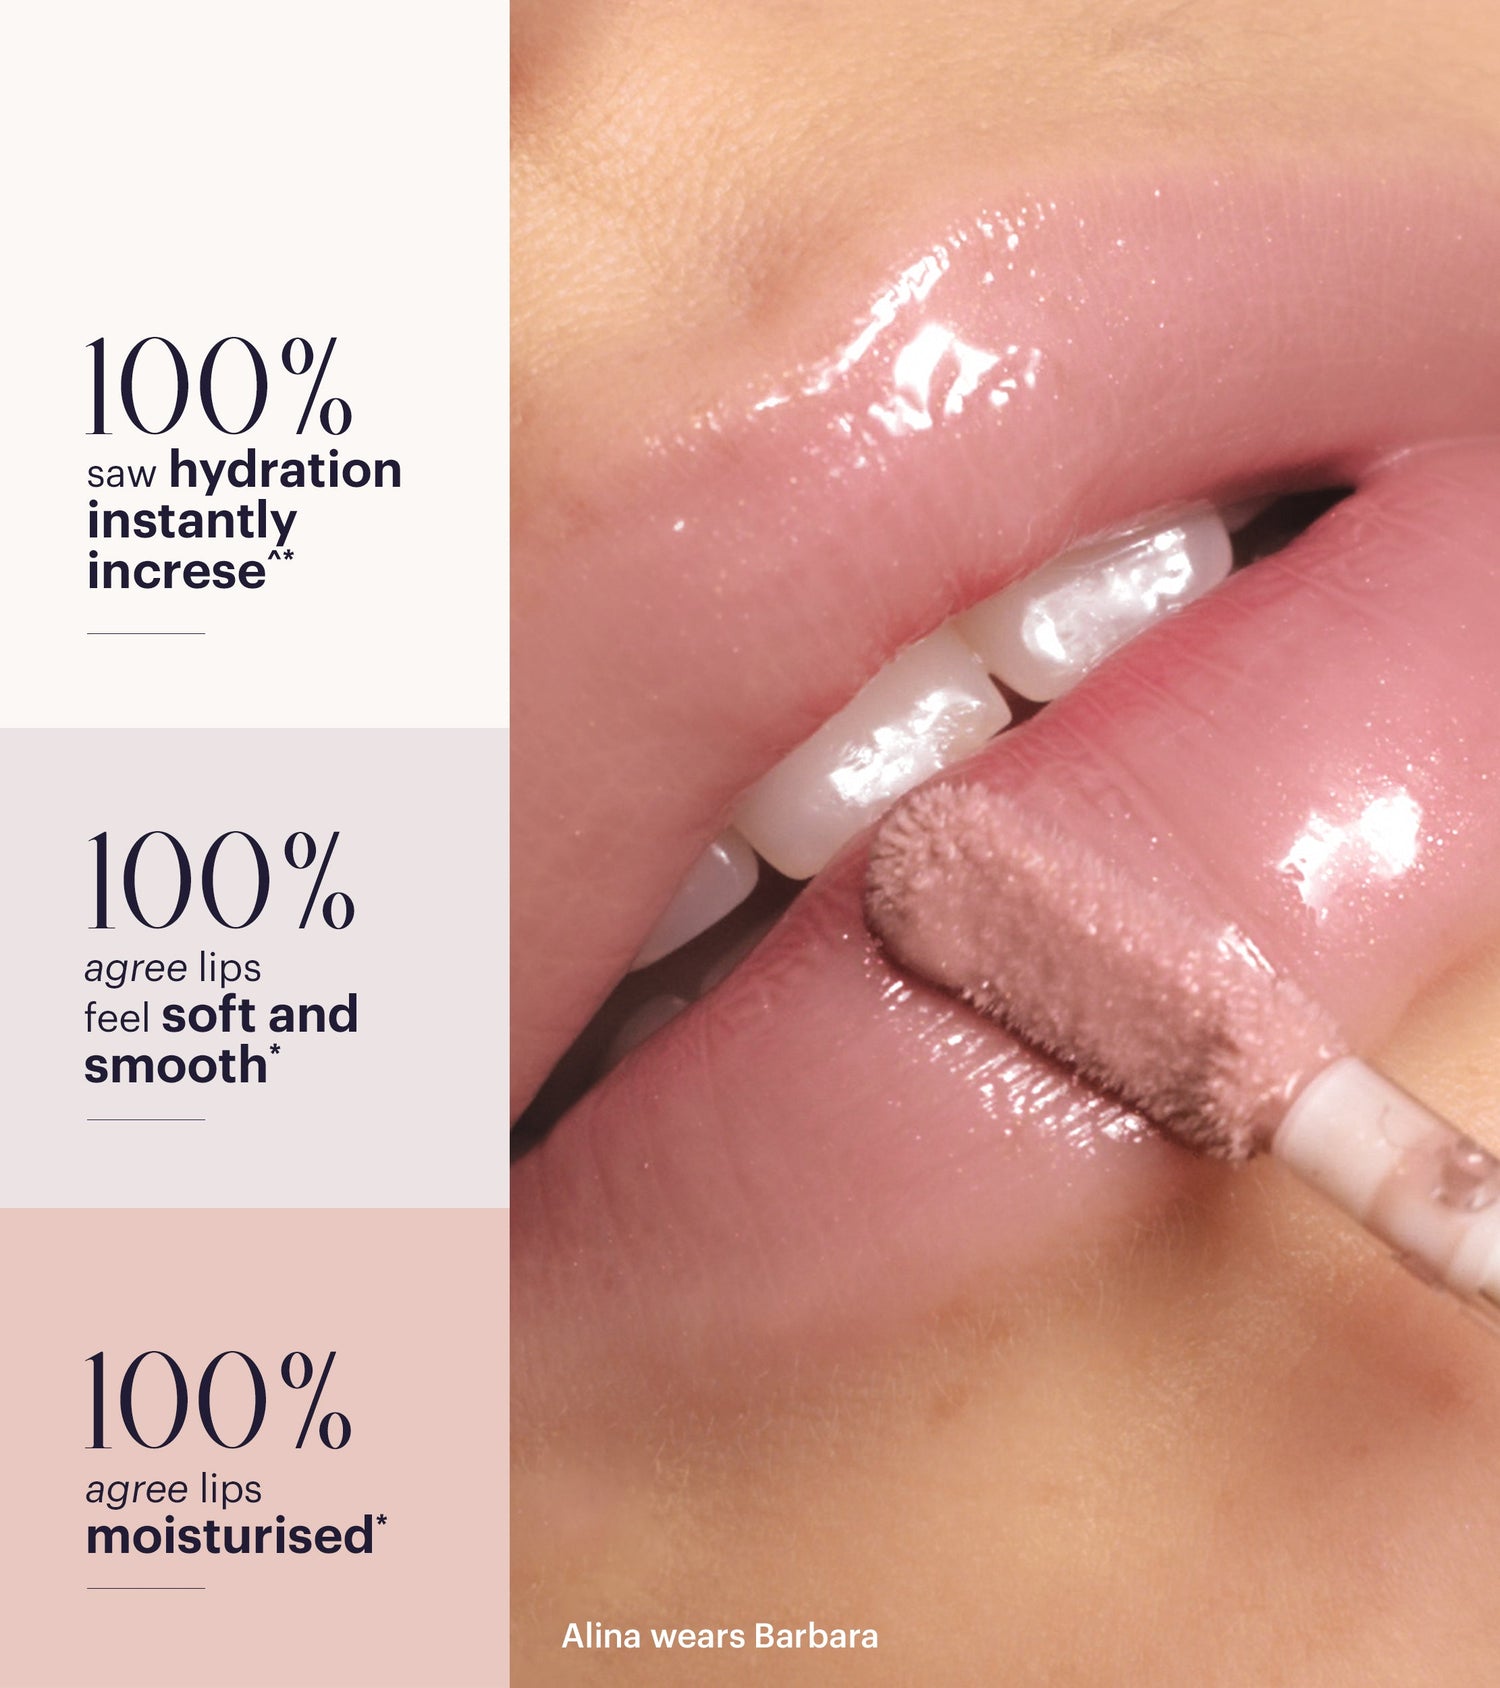 Pout Glaze High-Shine Hyaluronic Lip Gloss (Crystal) Main Image featured